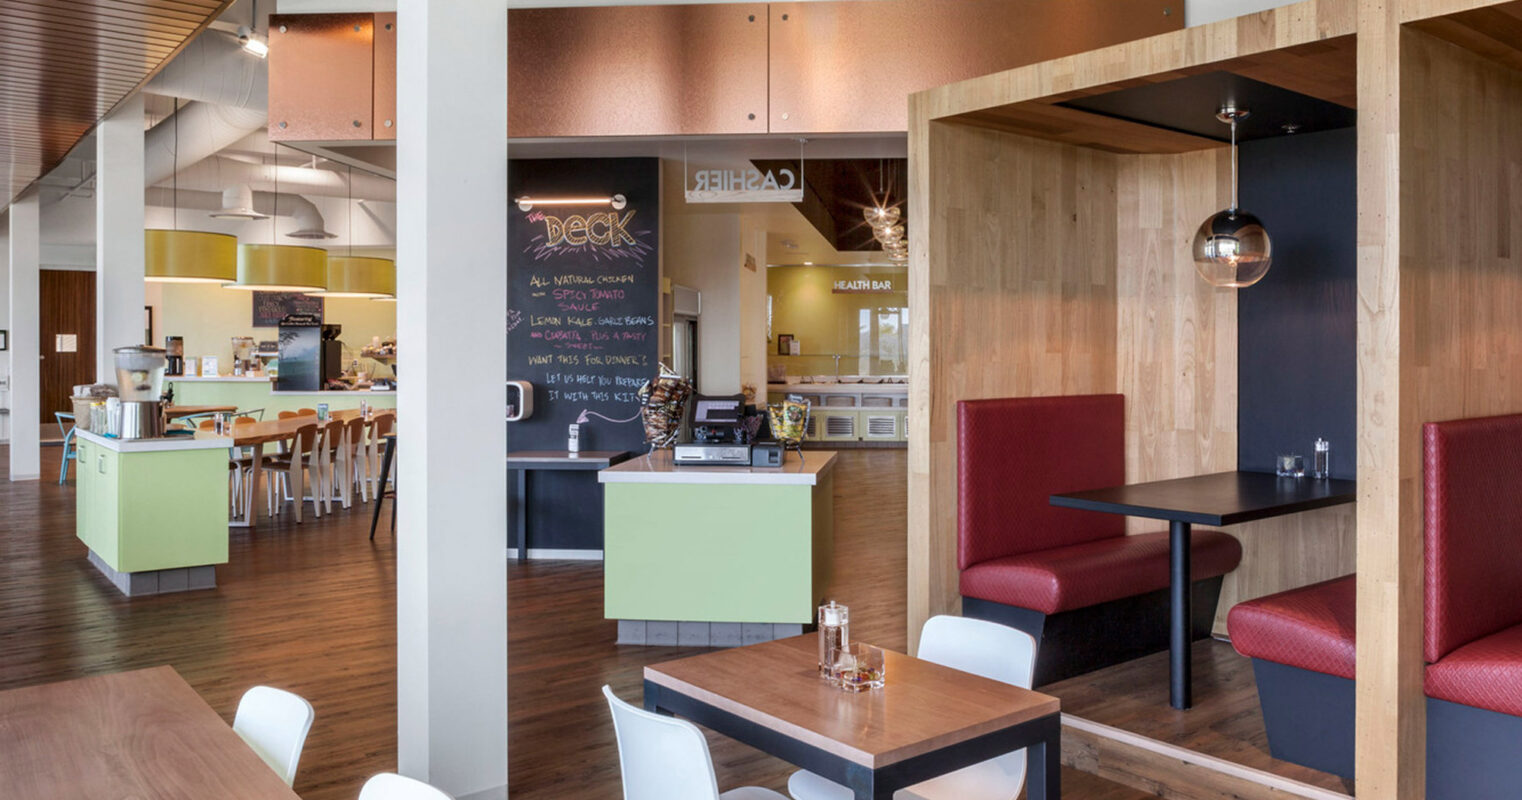 Modern café interior showcasing an open-concept layout with a harmonious blend of natural wood tones and vibrant accent colors. Structured wooden beams lead to a cozy dining nook with red upholstered seating. A central serving bar highlights minimalist design with a welcoming chalkboard menu.